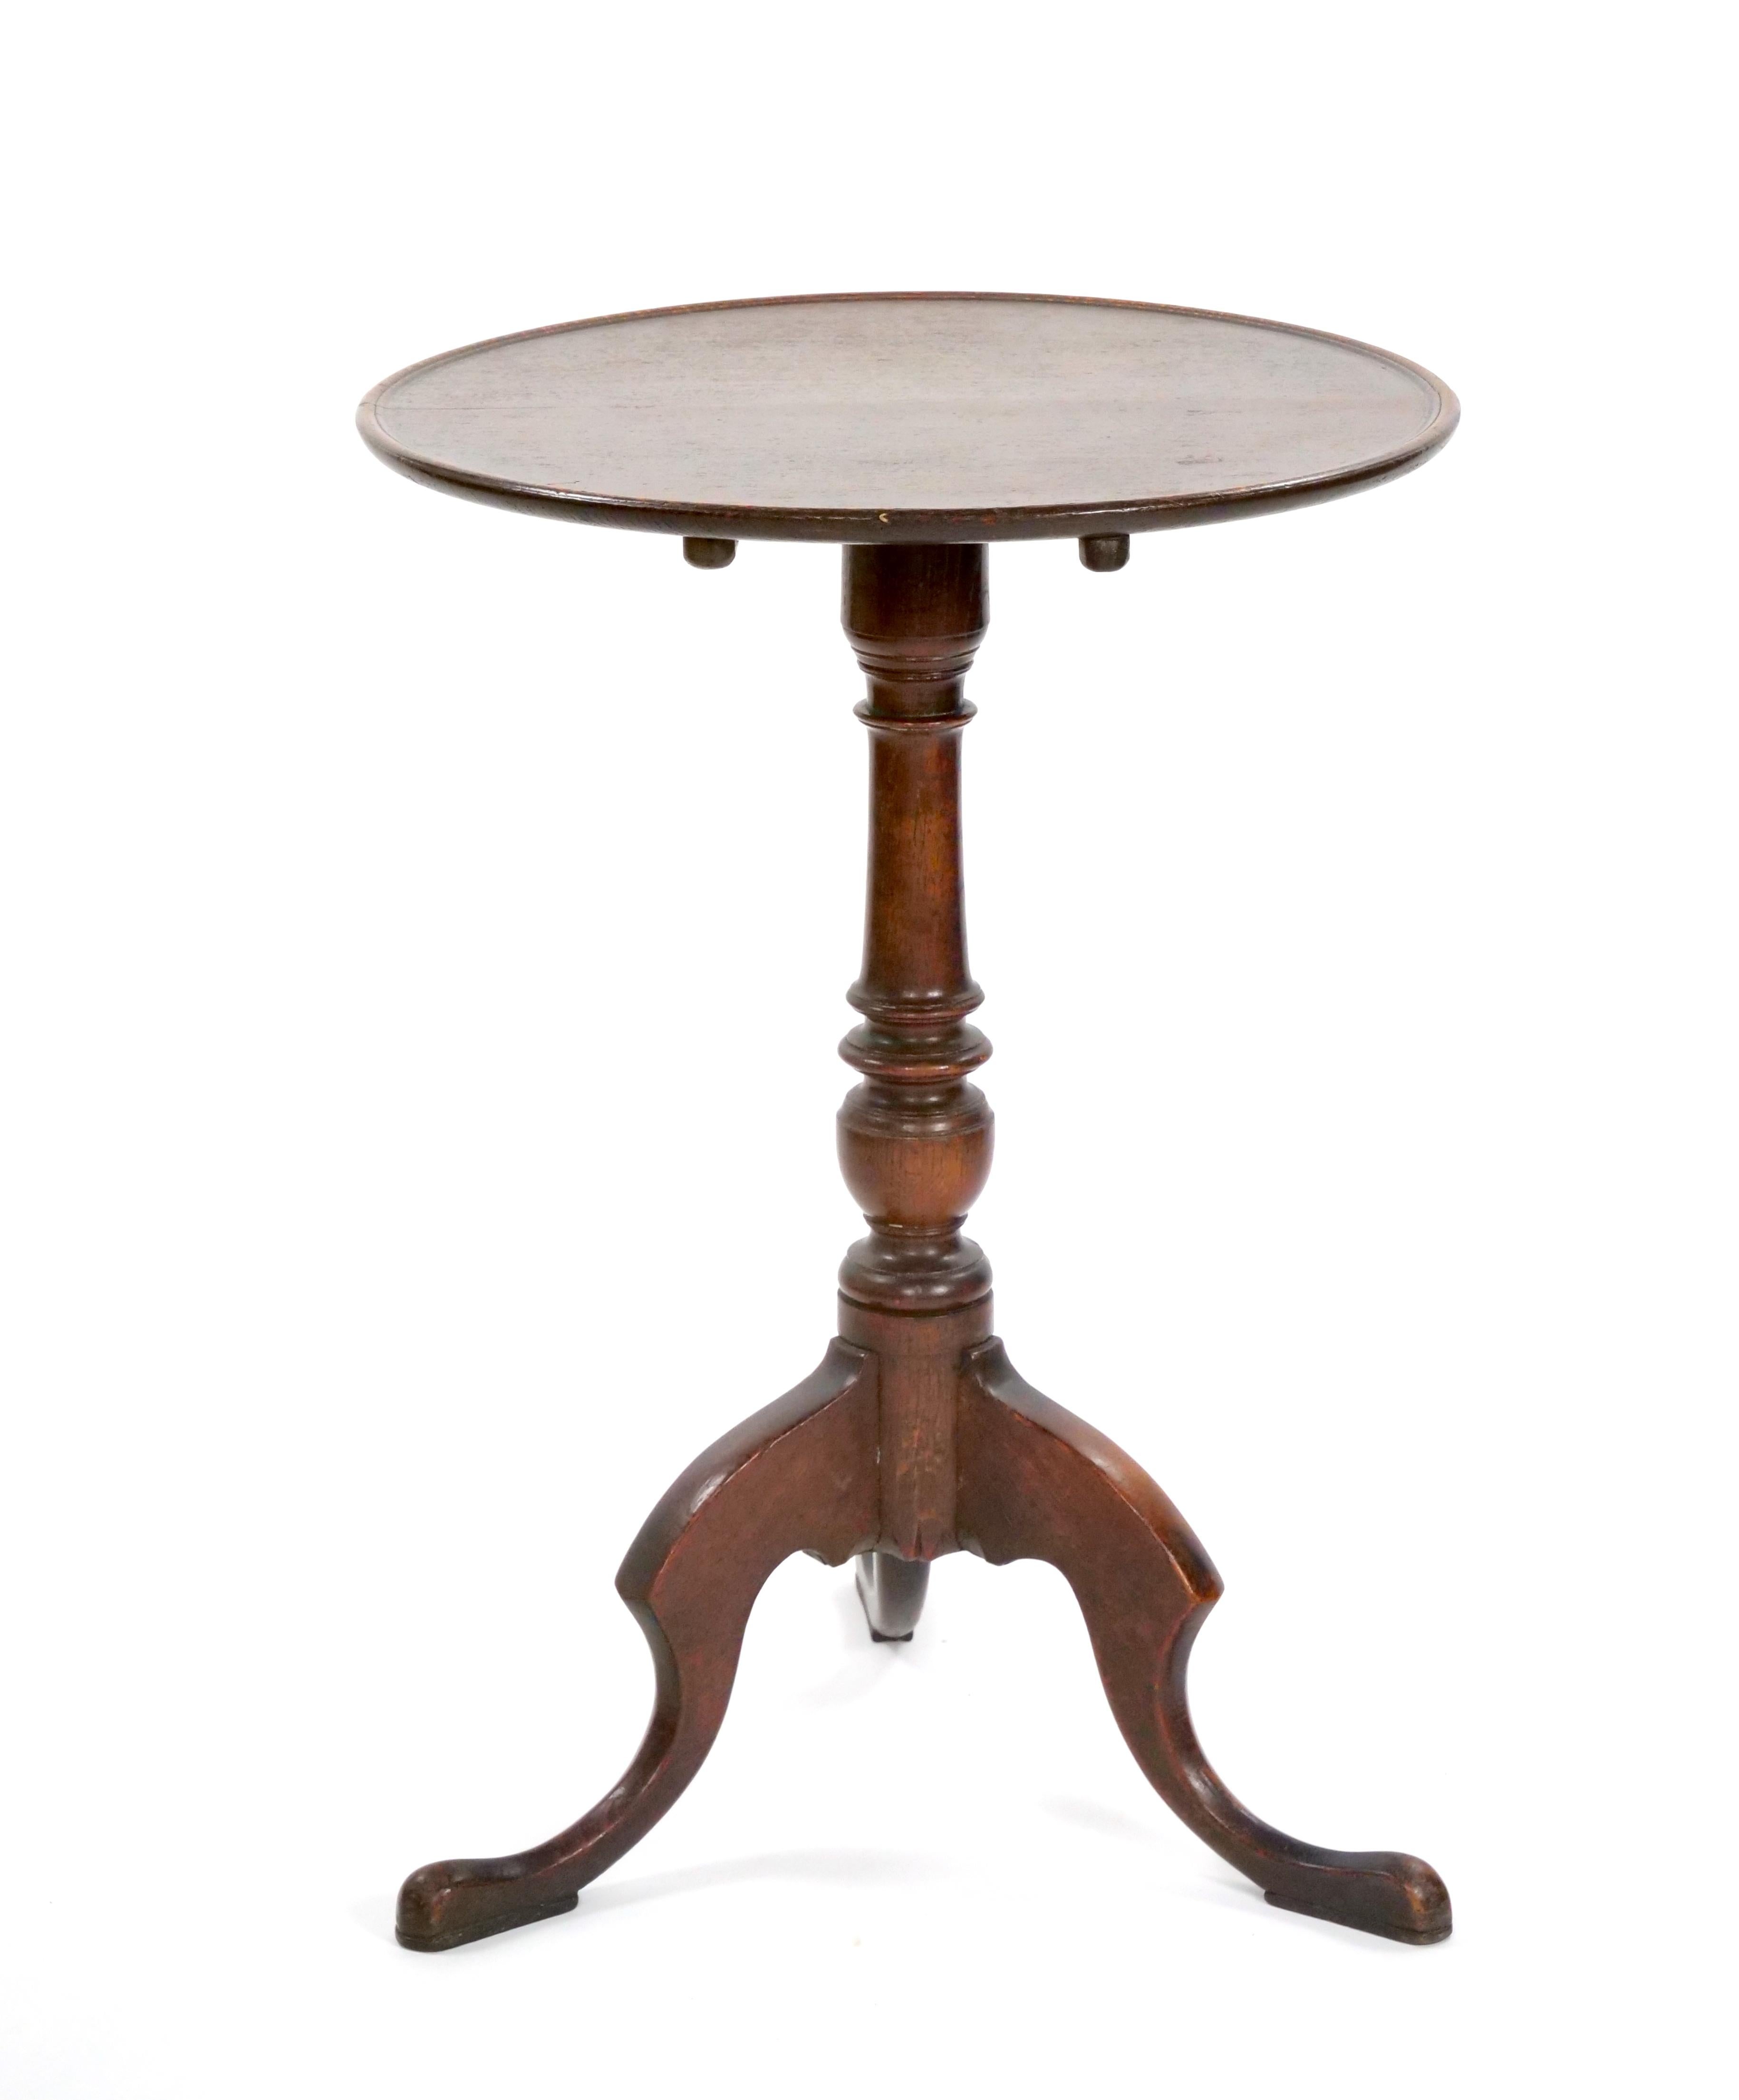 19th Century Victorian Mahogany Tripod Pedestal Candle Stand For Sale 3